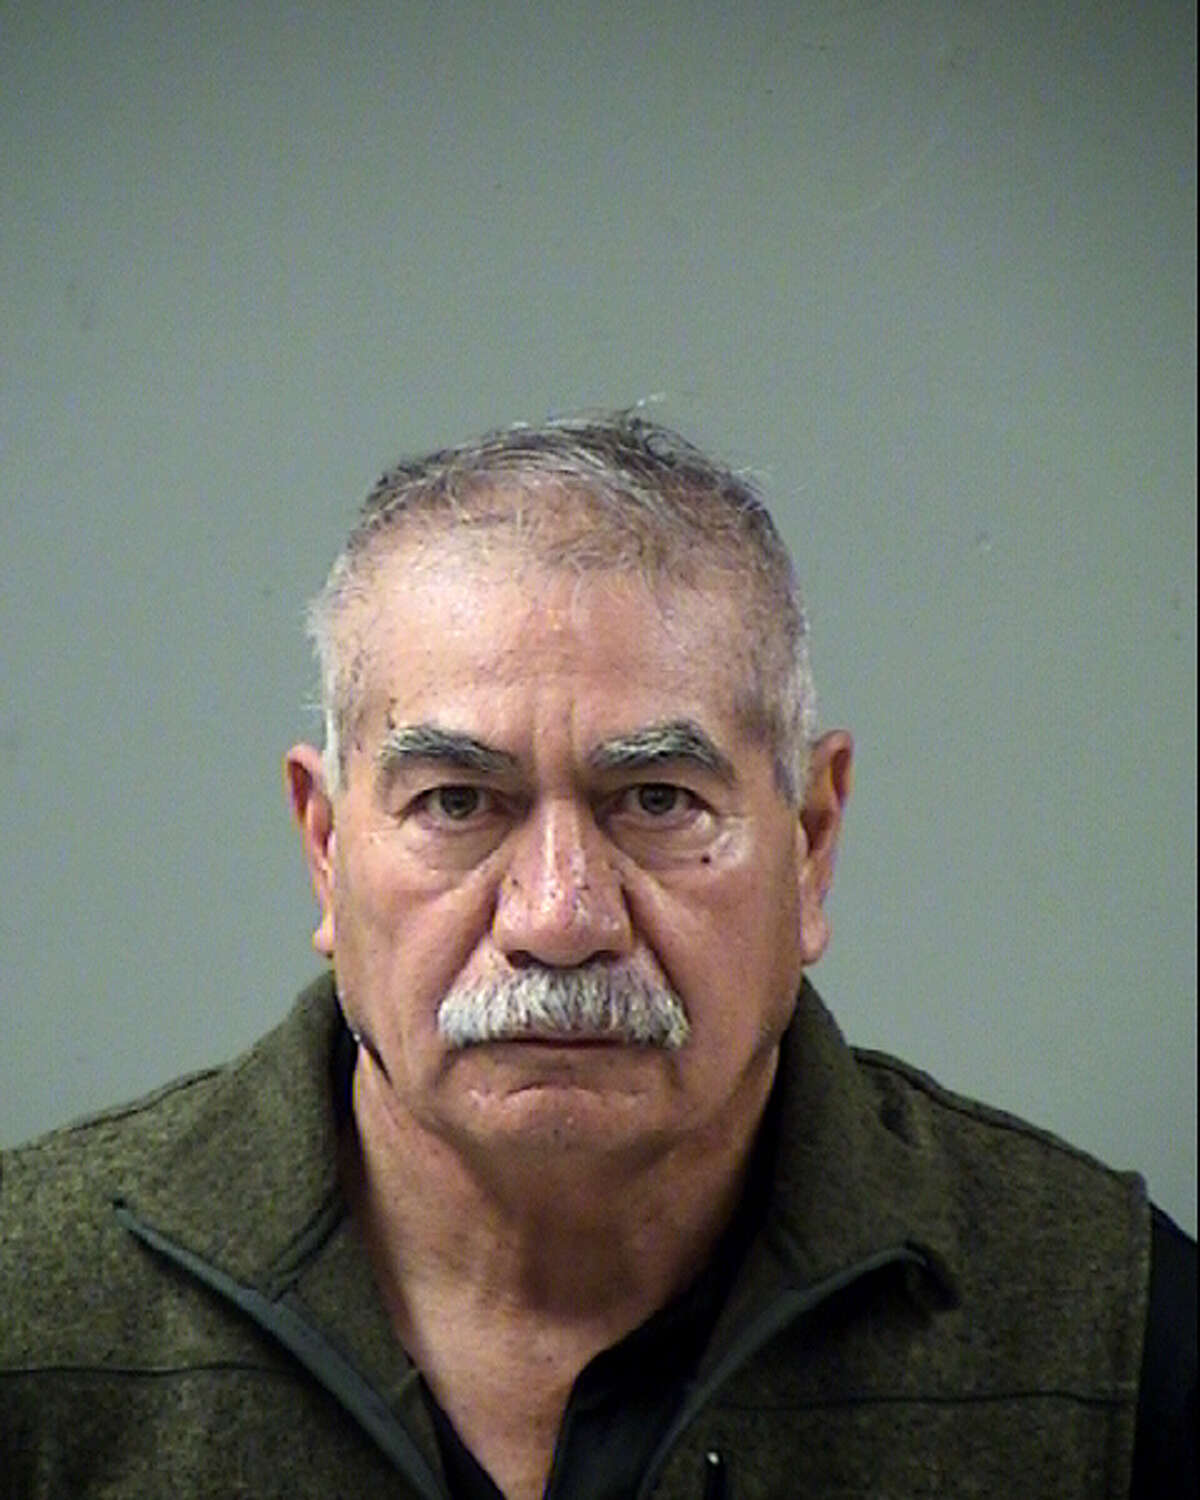 Jesus Barrientos now faces a charge of indecent contact with a child. He remains in the Bexar County Jail on a $10,000 bond.